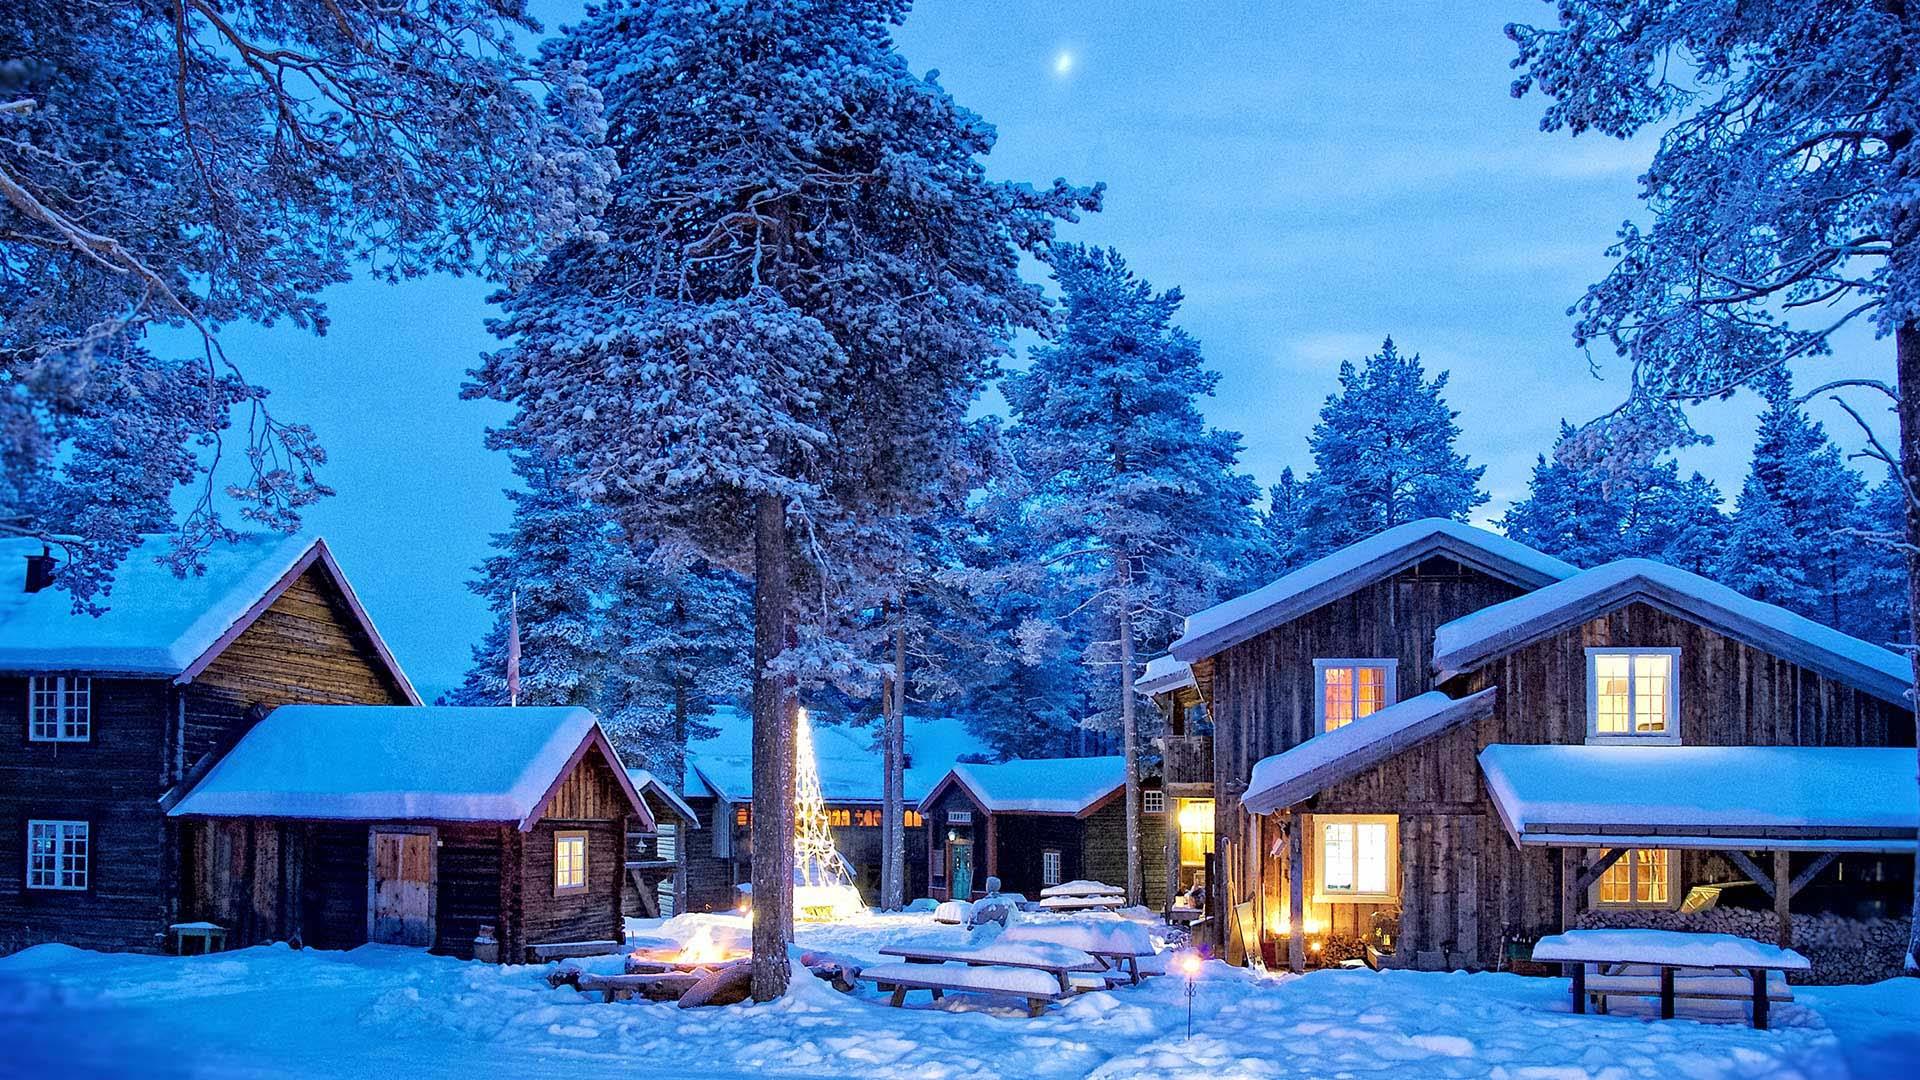 A compund of log buildungs which serve as a hotel in open pine forest a winter night with snow and a full moon.